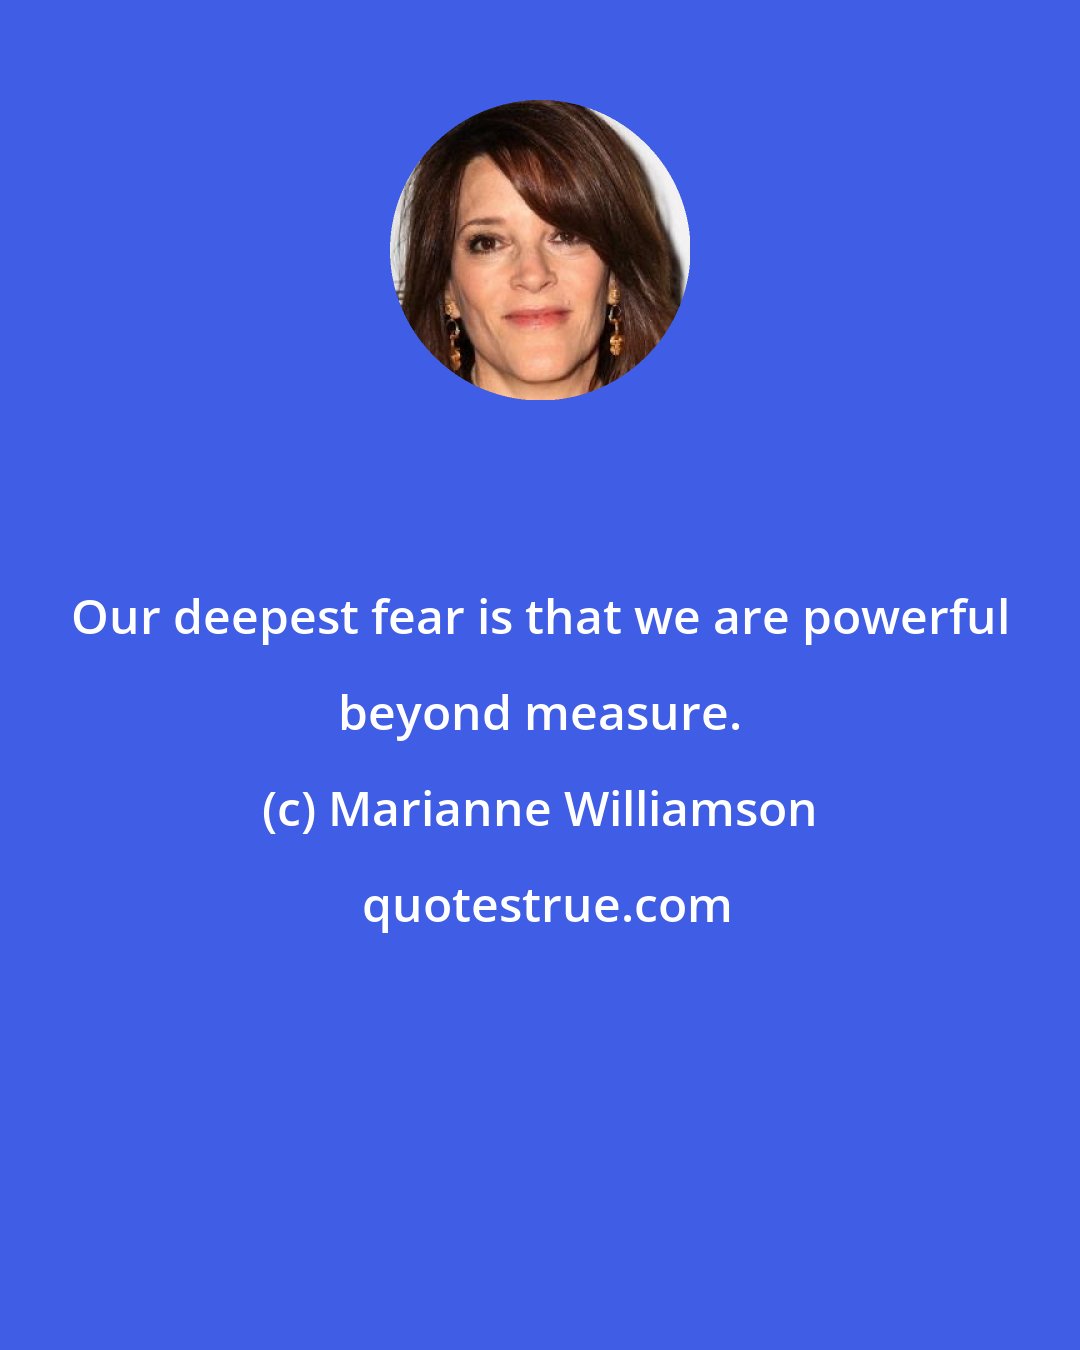 Marianne Williamson: Our deepest fear is that we are powerful beyond measure.